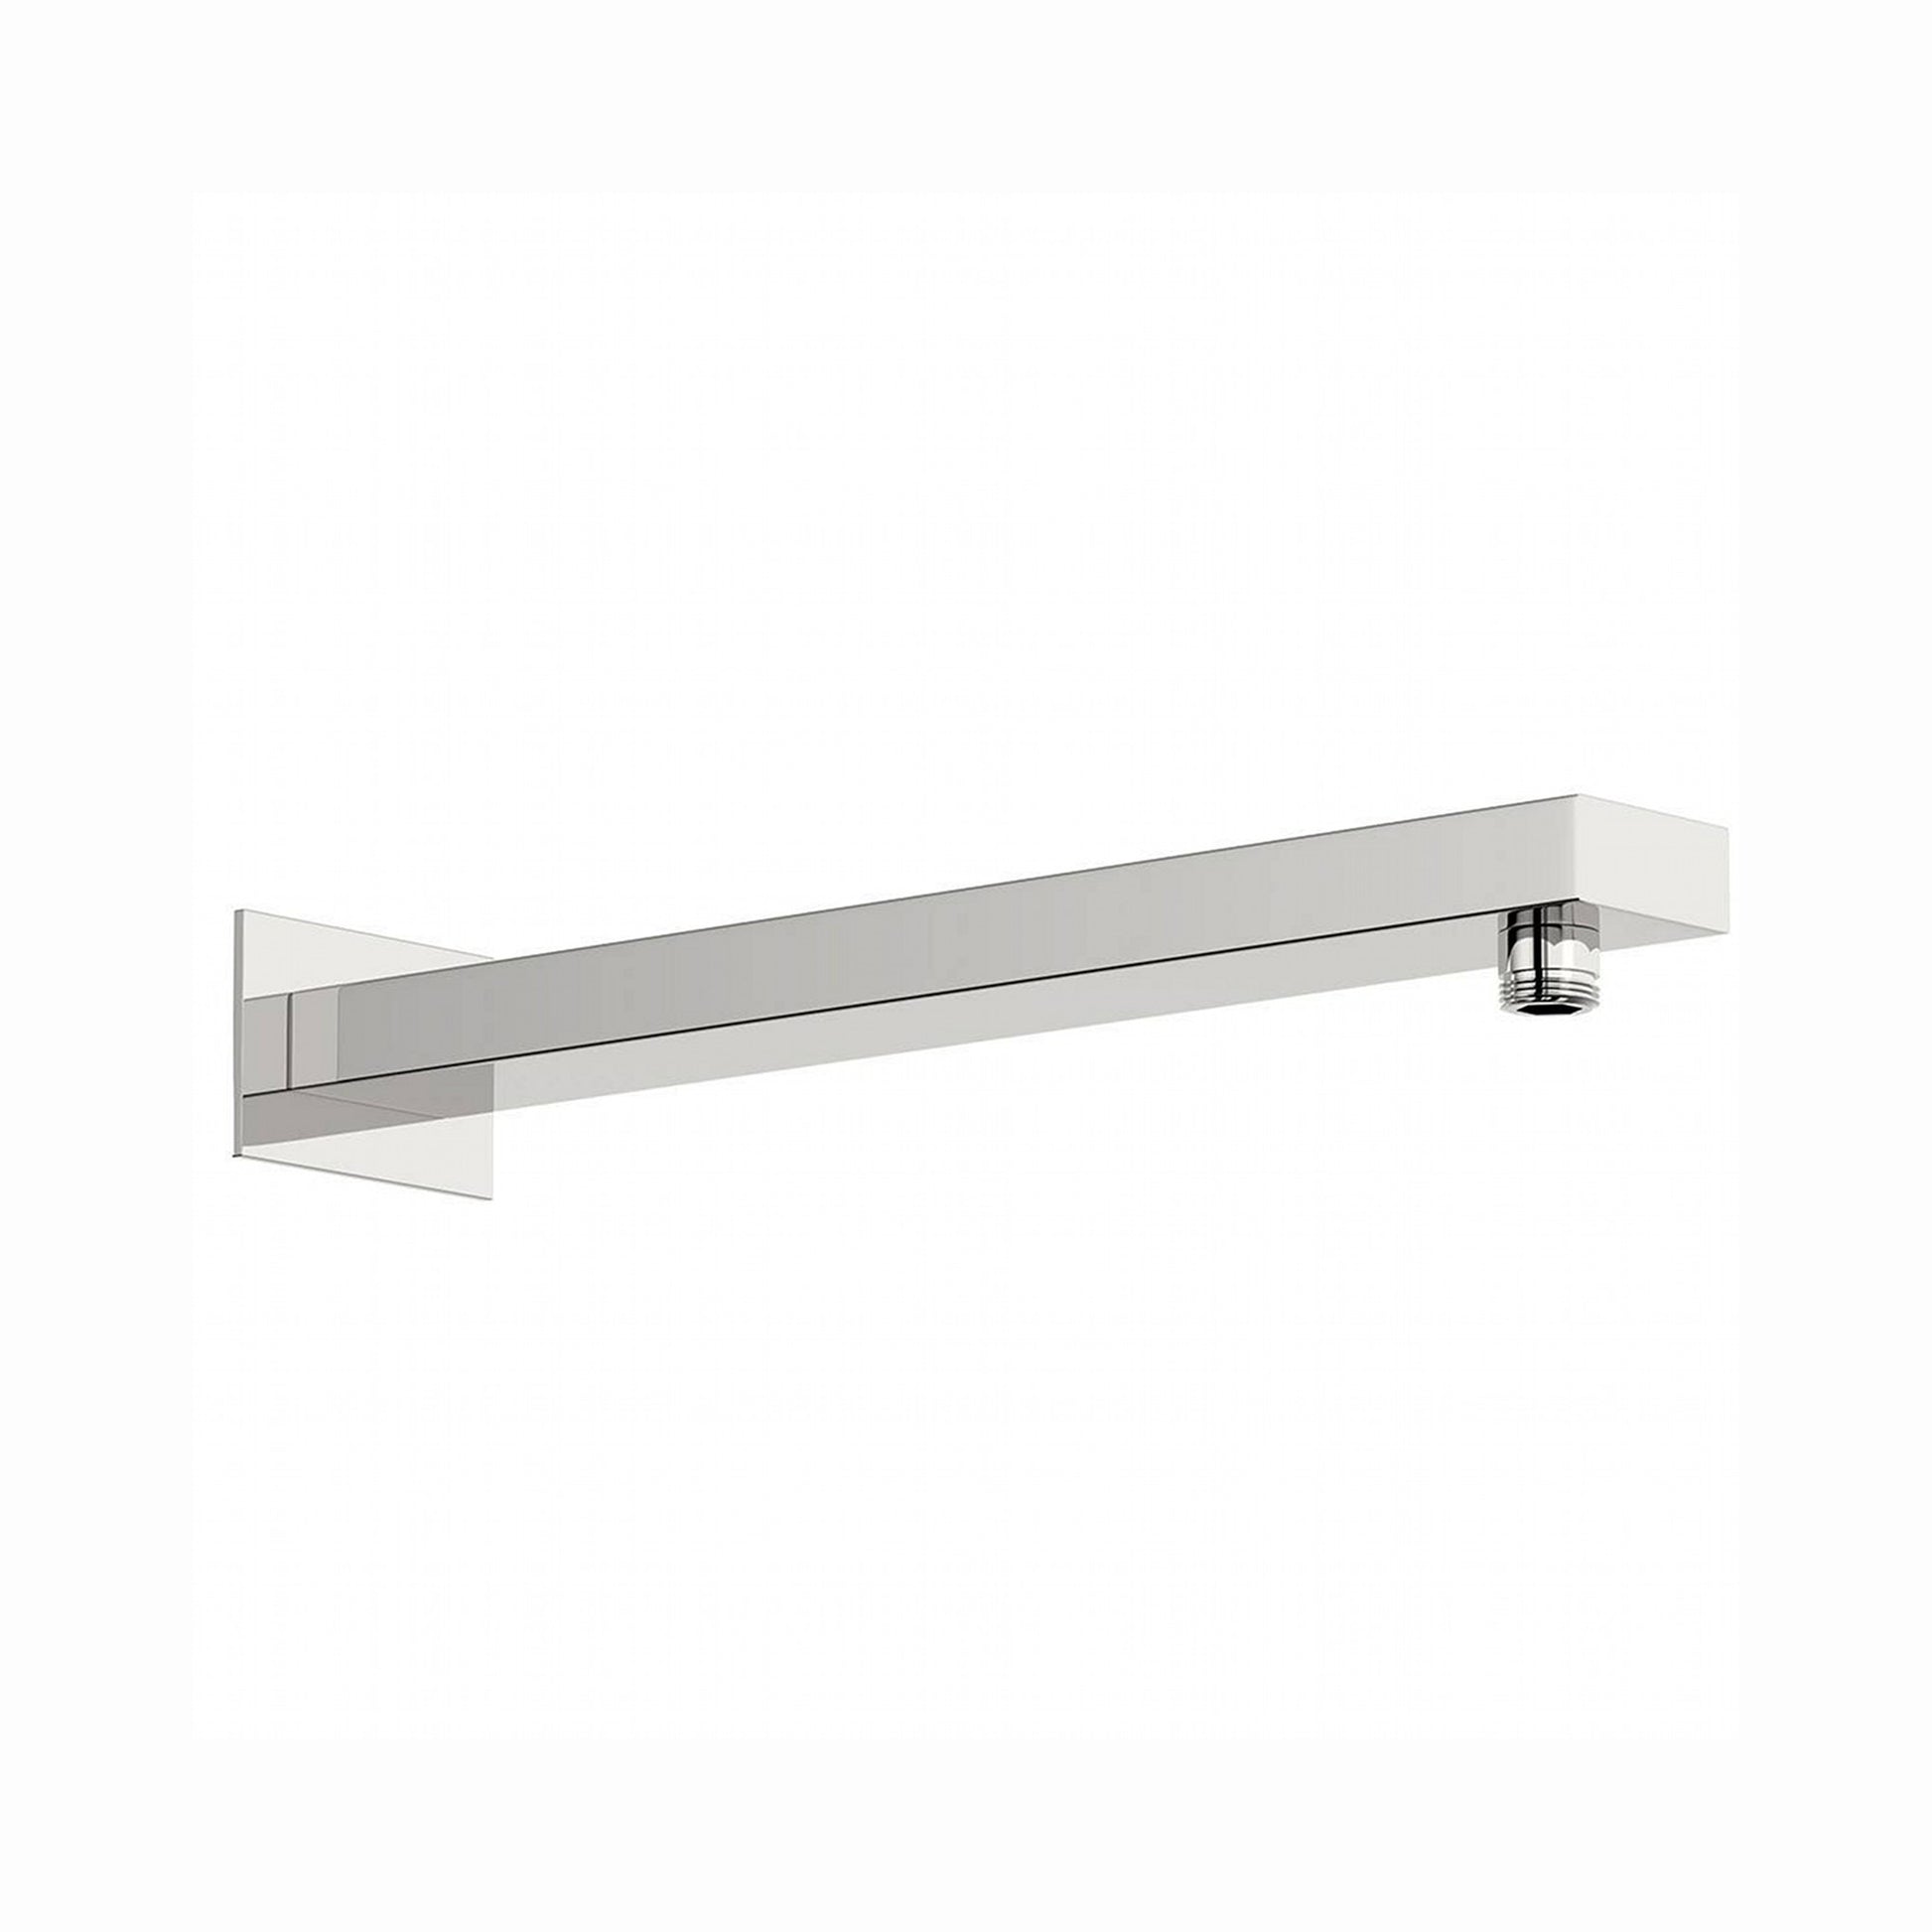 Square wall mounted shower arm chrome - 350mm - Showers